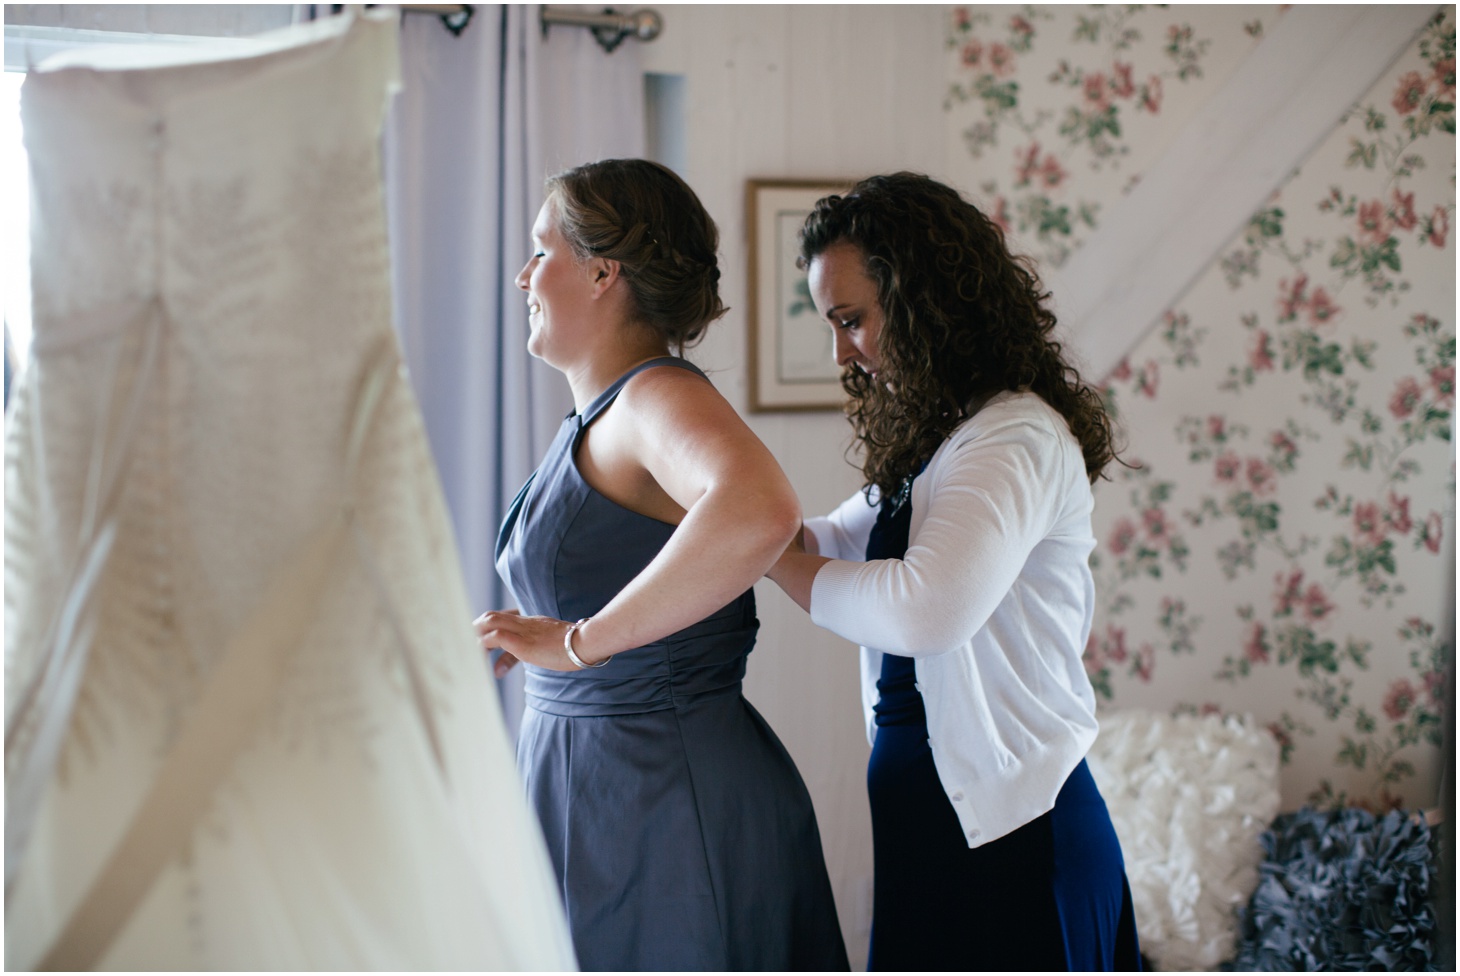 Behind the Scenes in 2014 - Weddings by Sarah Bradshaw Photography_0102